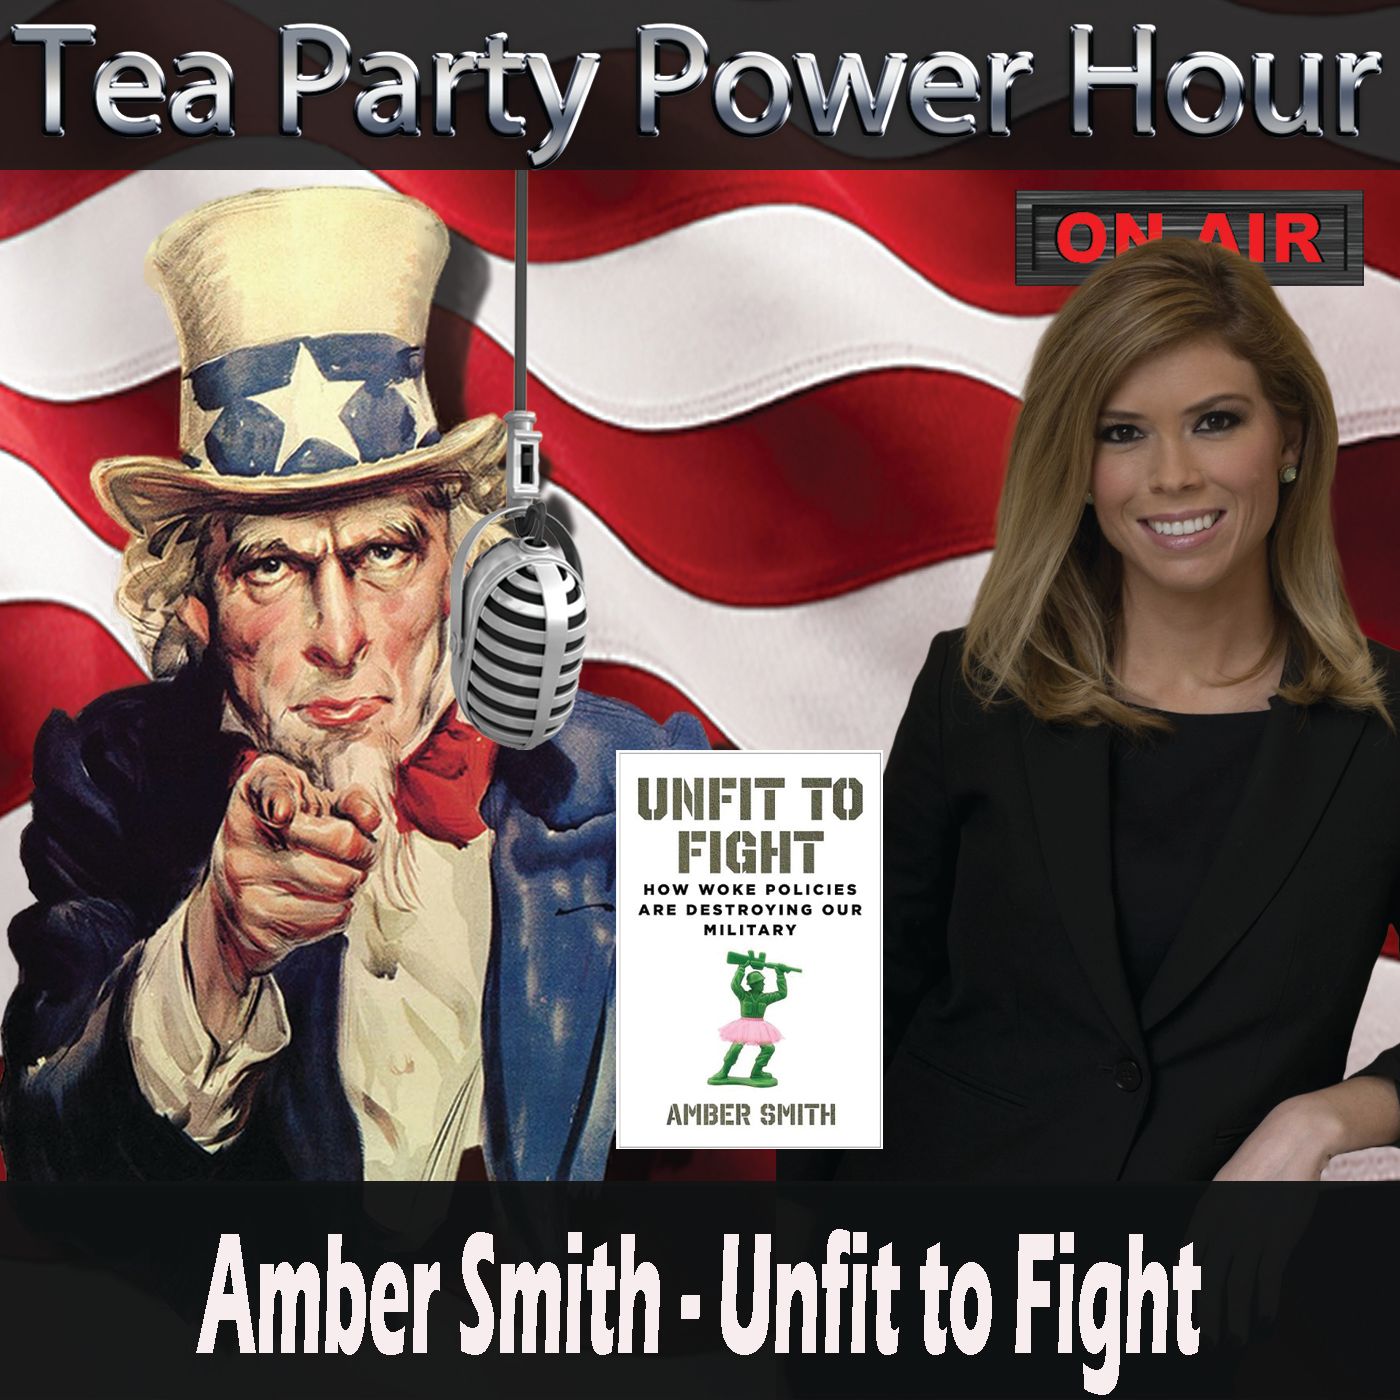 Amber Smith - Unfit to Fight